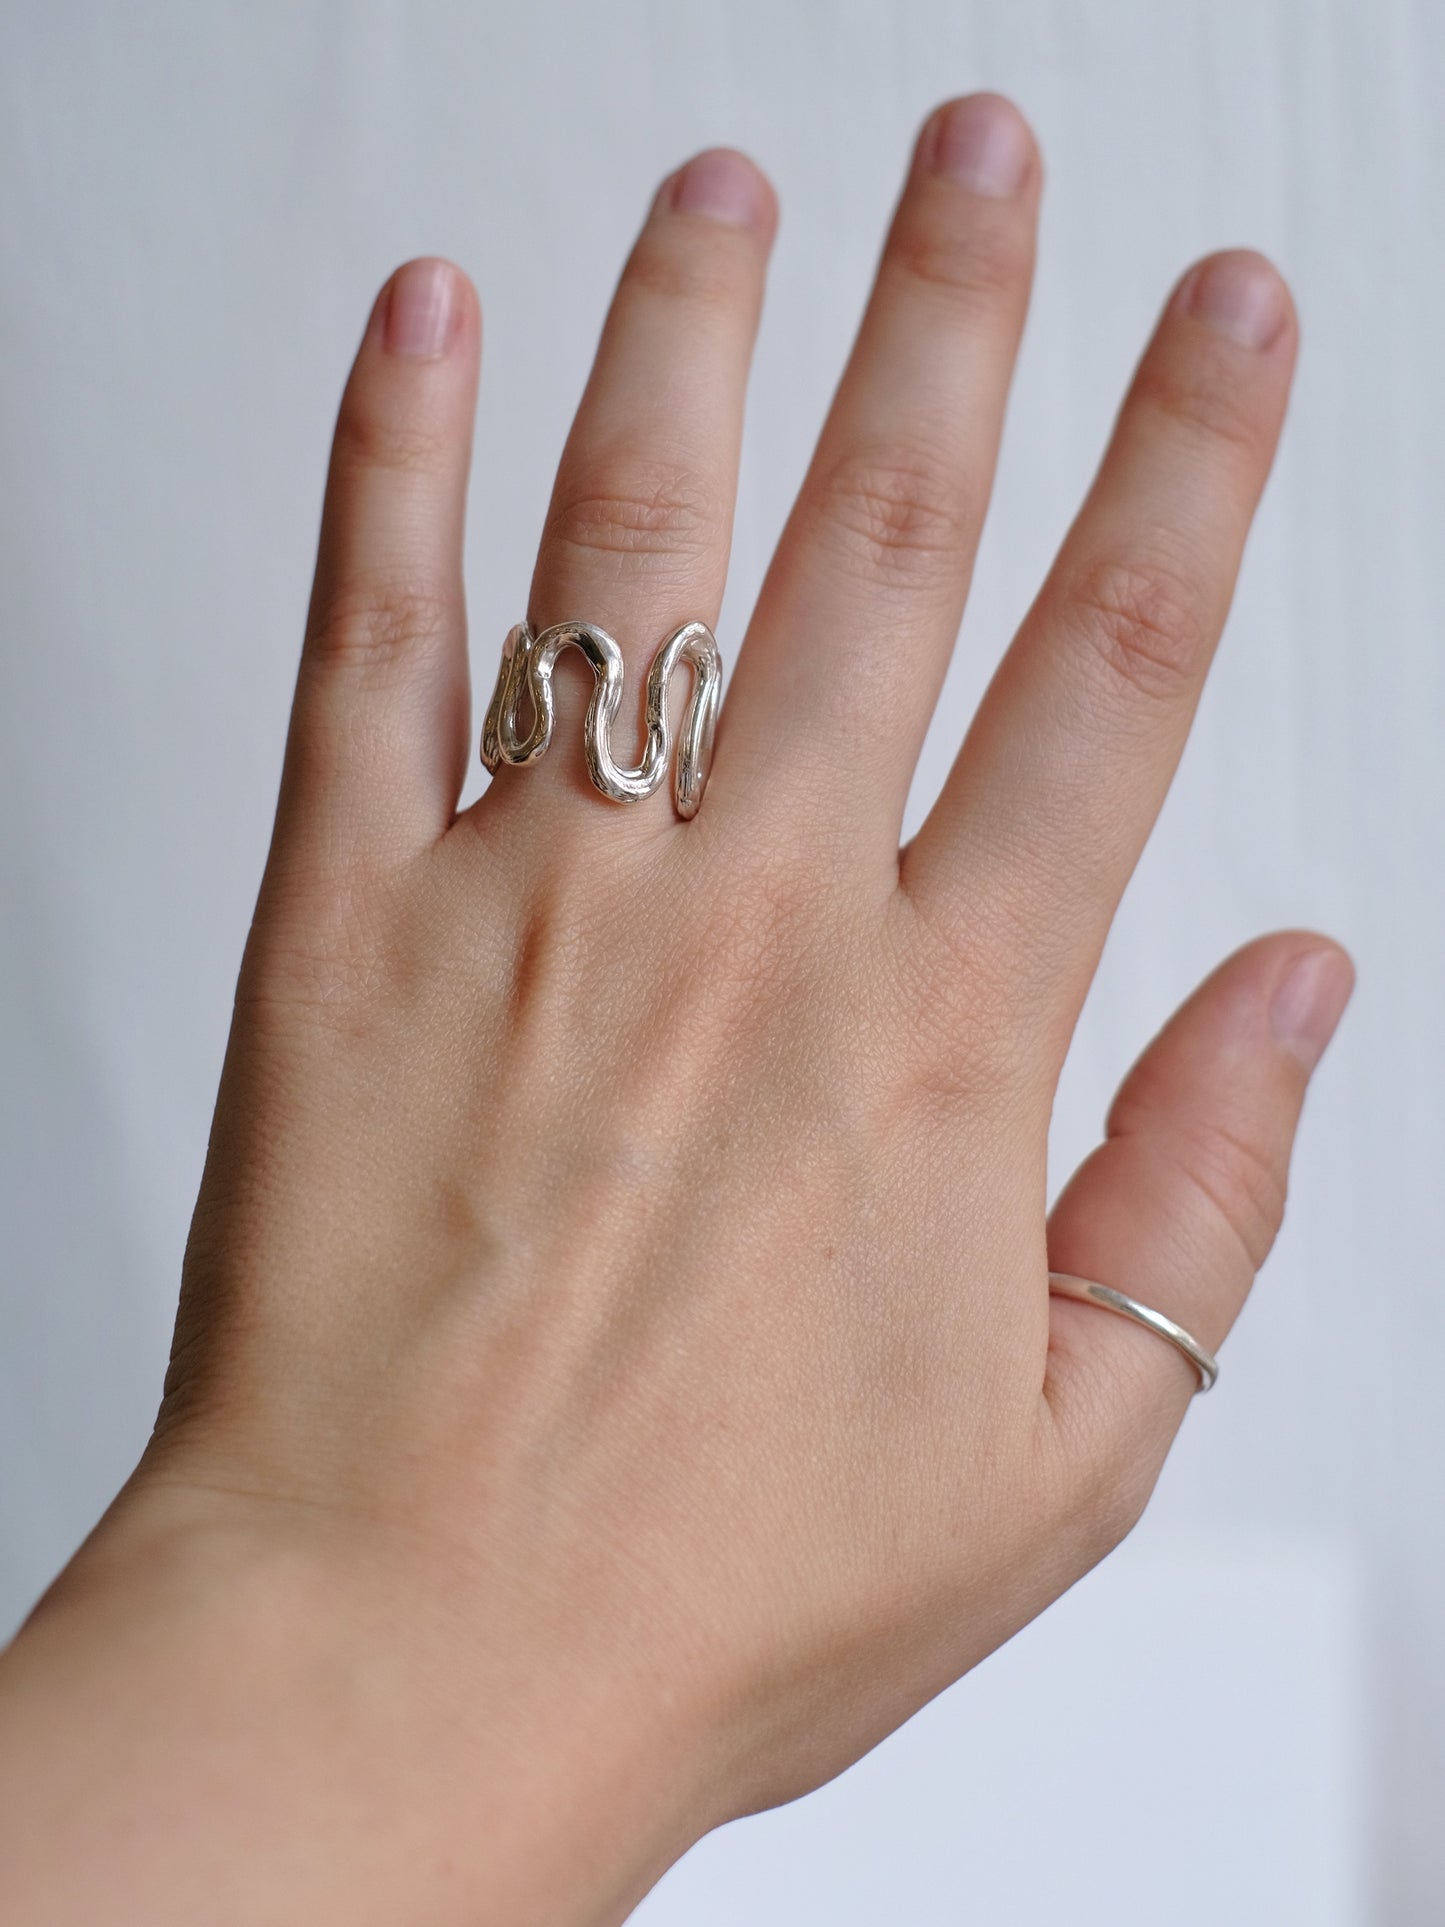 Ring "Pure snake" one size